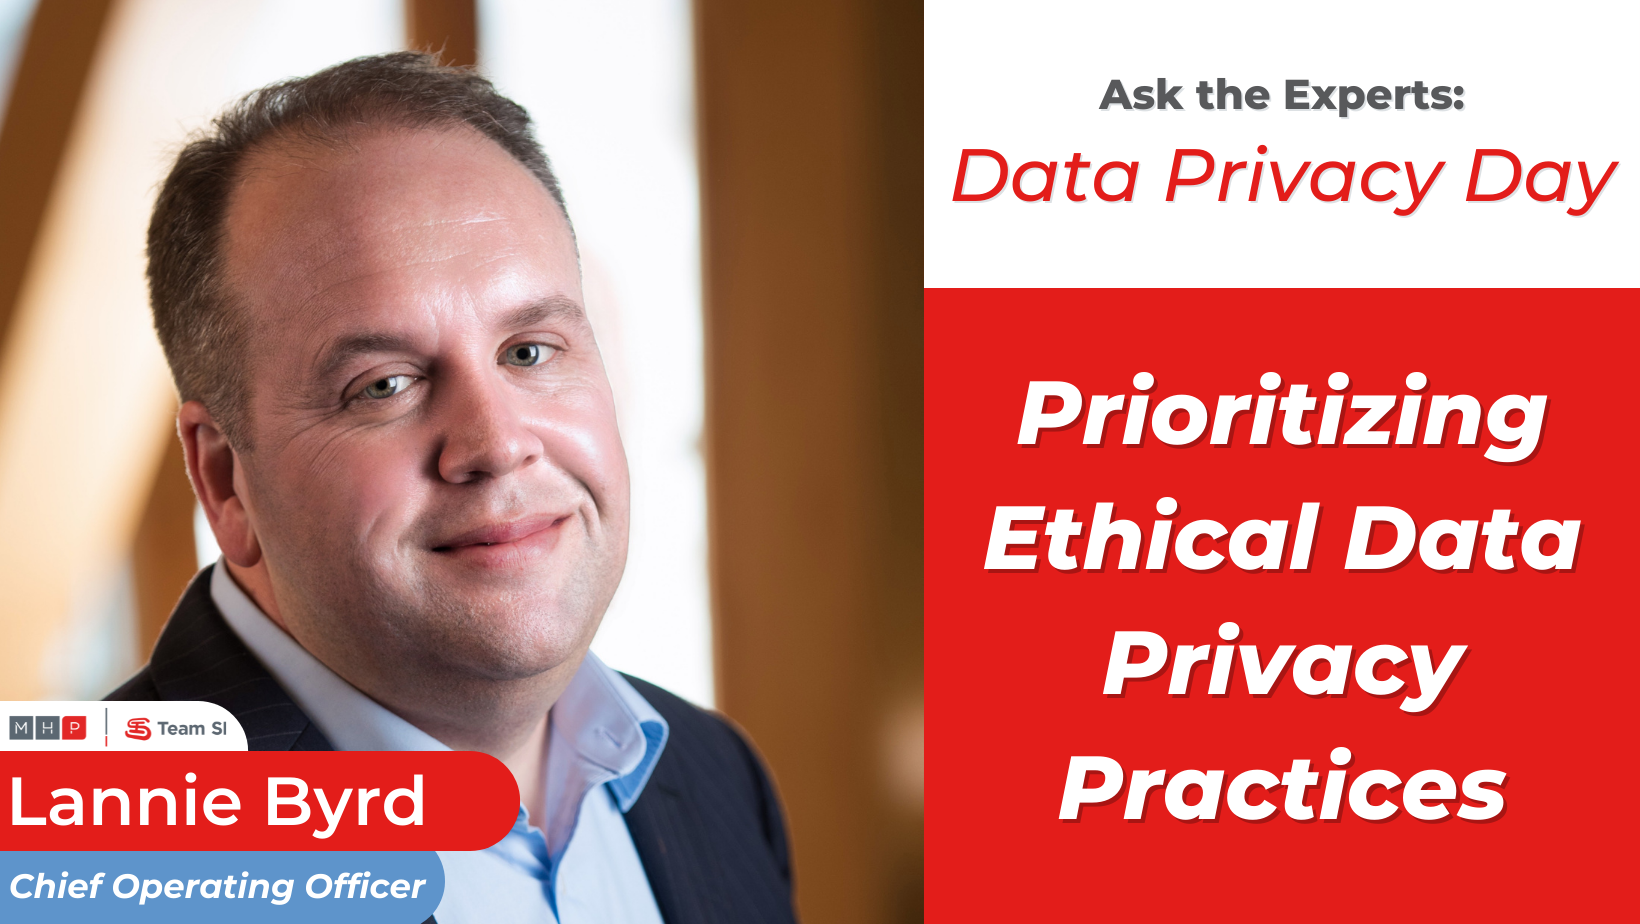 COO Lannie Byrd discusses prioritizing ethical data privacy practices.